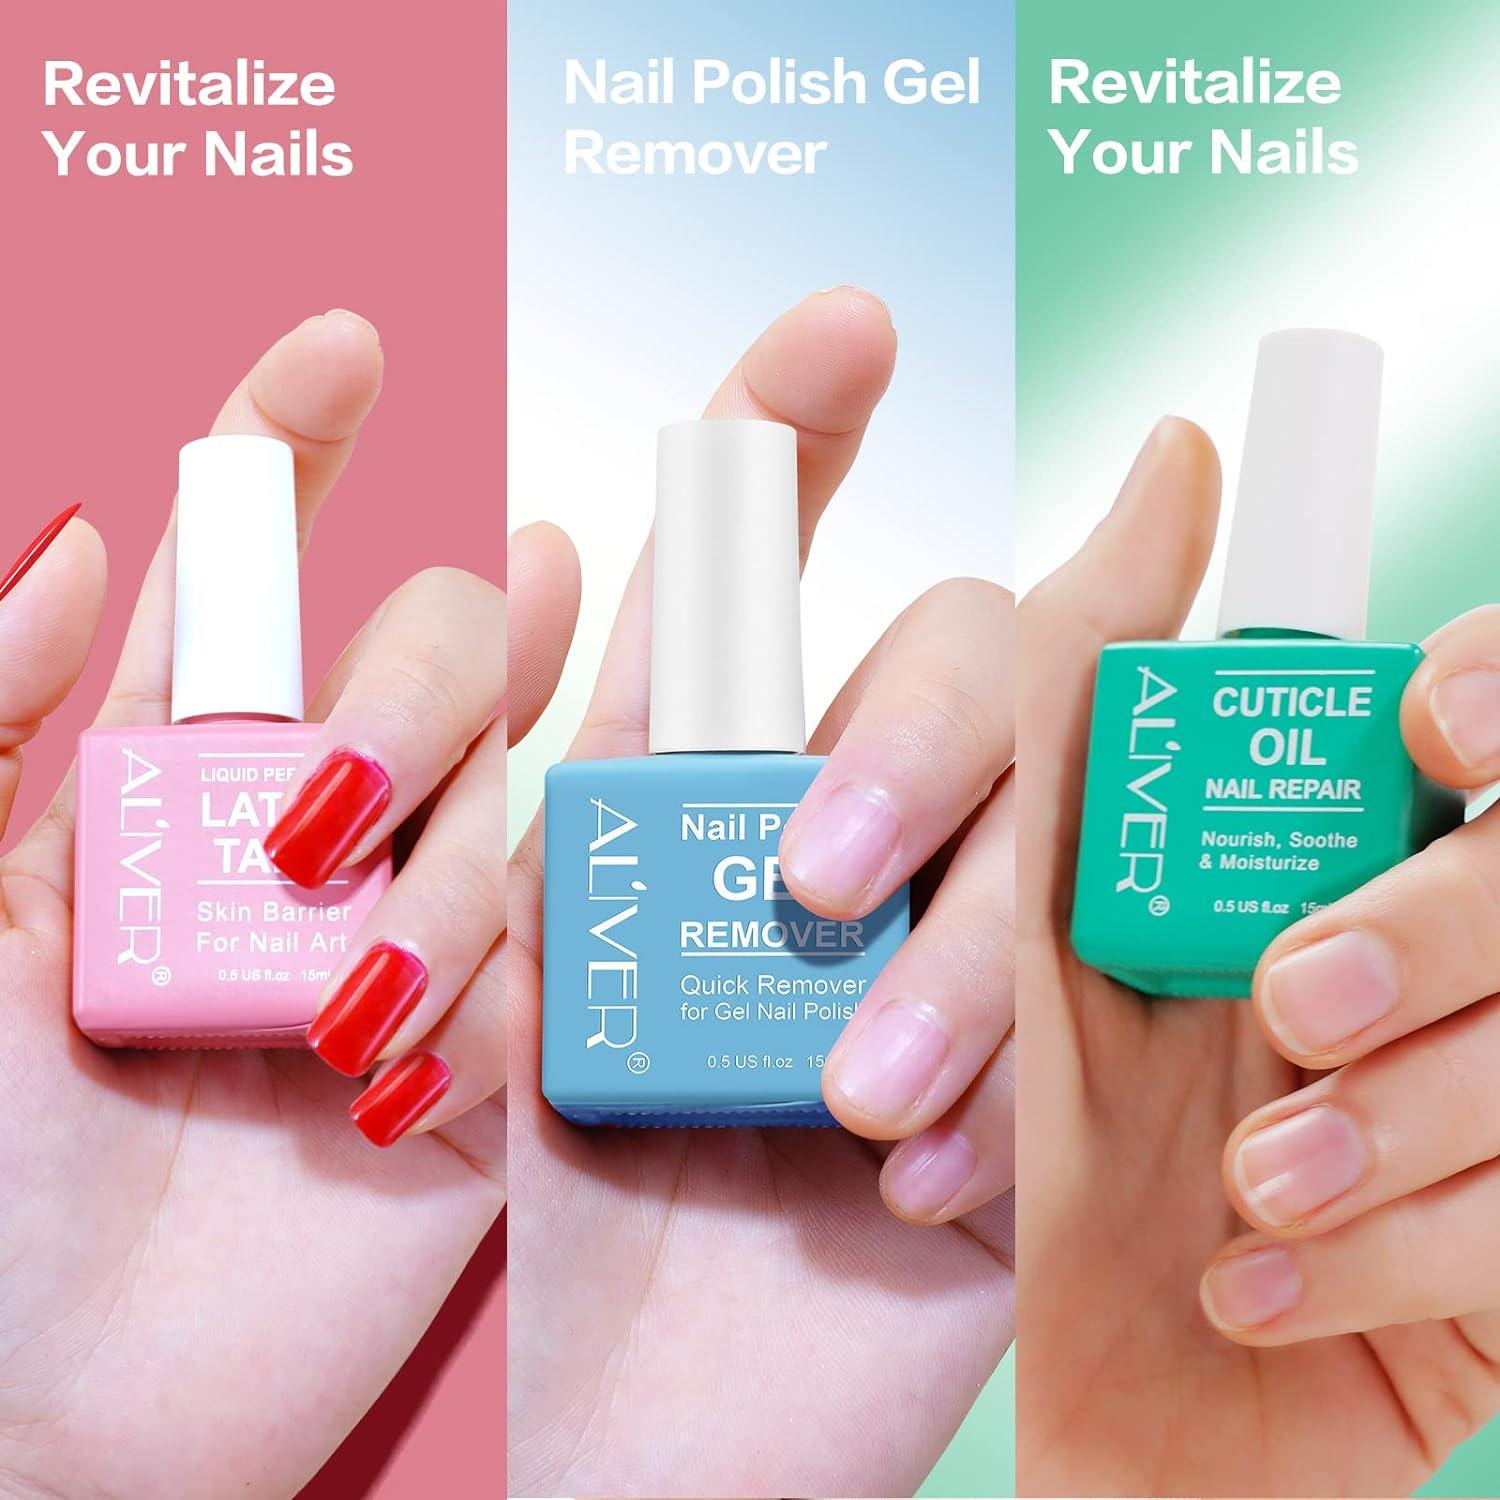 Amazon.com : ALIVER Gel Nail Polish Remover, Gel Polish Remover with  Cuticle Pusher and Nail Polish Scraper, Quickly & Easily Removes Nail Polish  in 2-5 Minutes, Not Hurt Nails : Beauty &